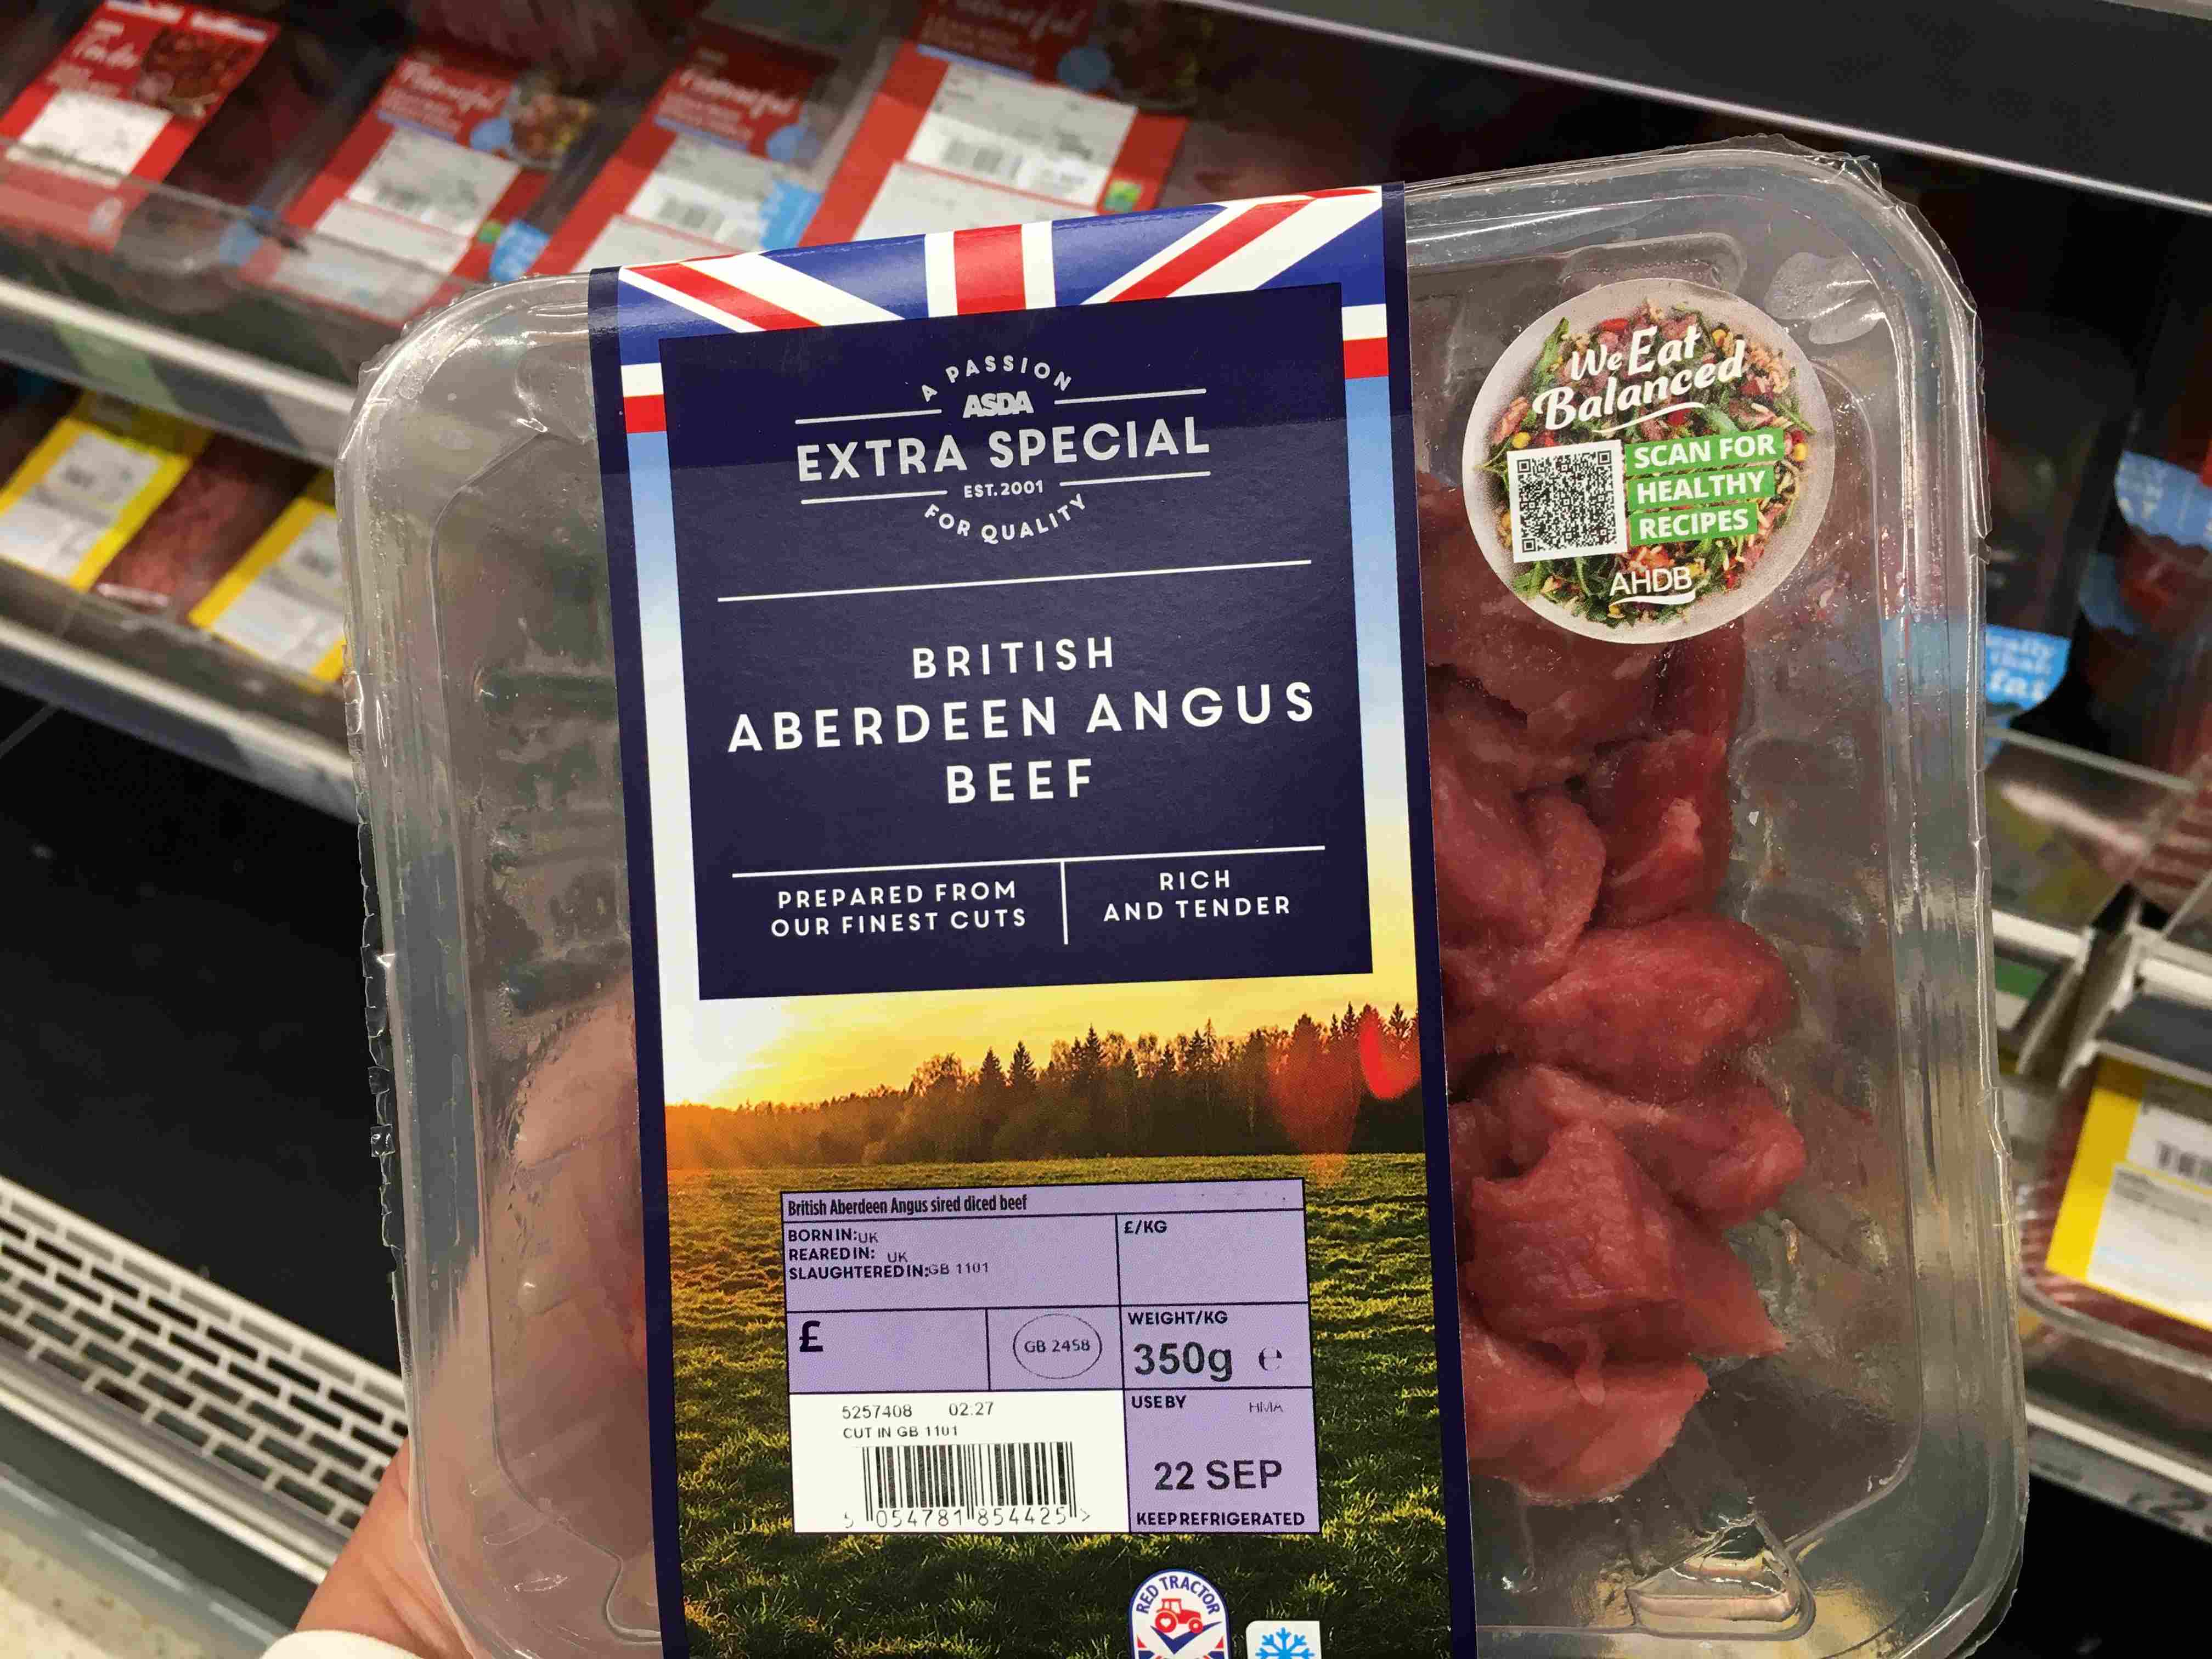 Pack of Beef with a We Eat Balanced campaign sticker. 